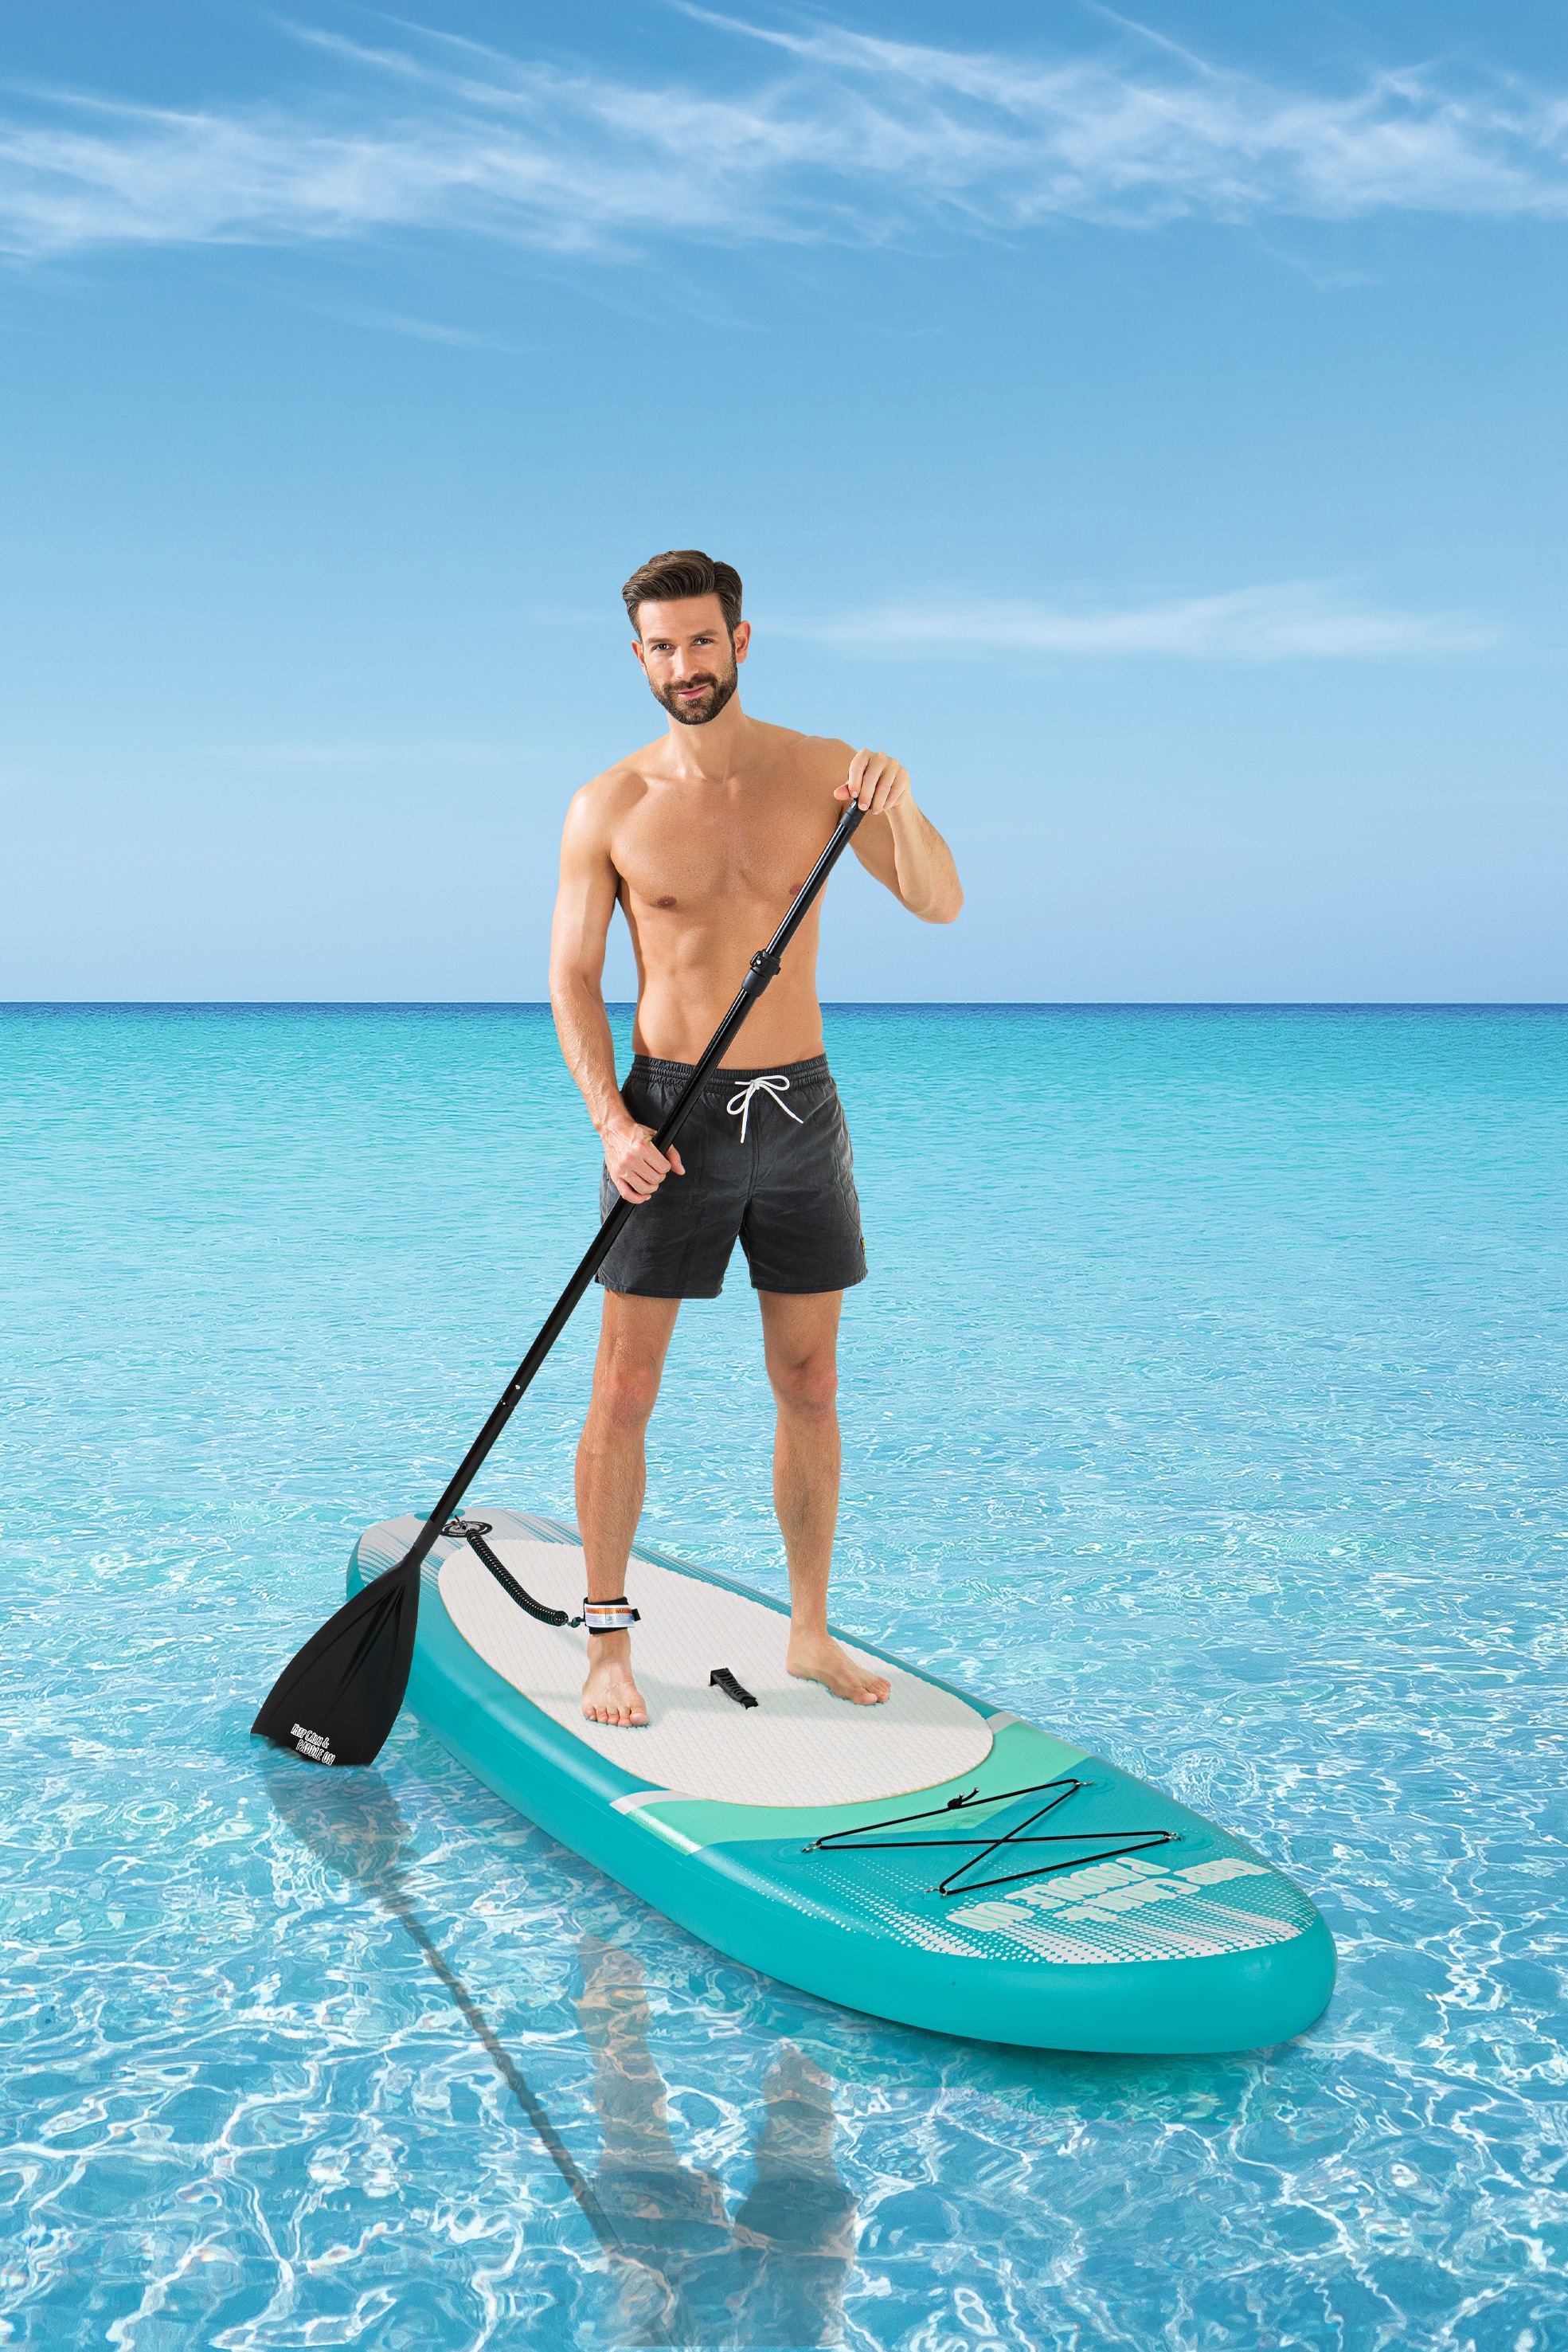 kaufen jetzt | Paddle online bei Stand-Up SUP-Boards